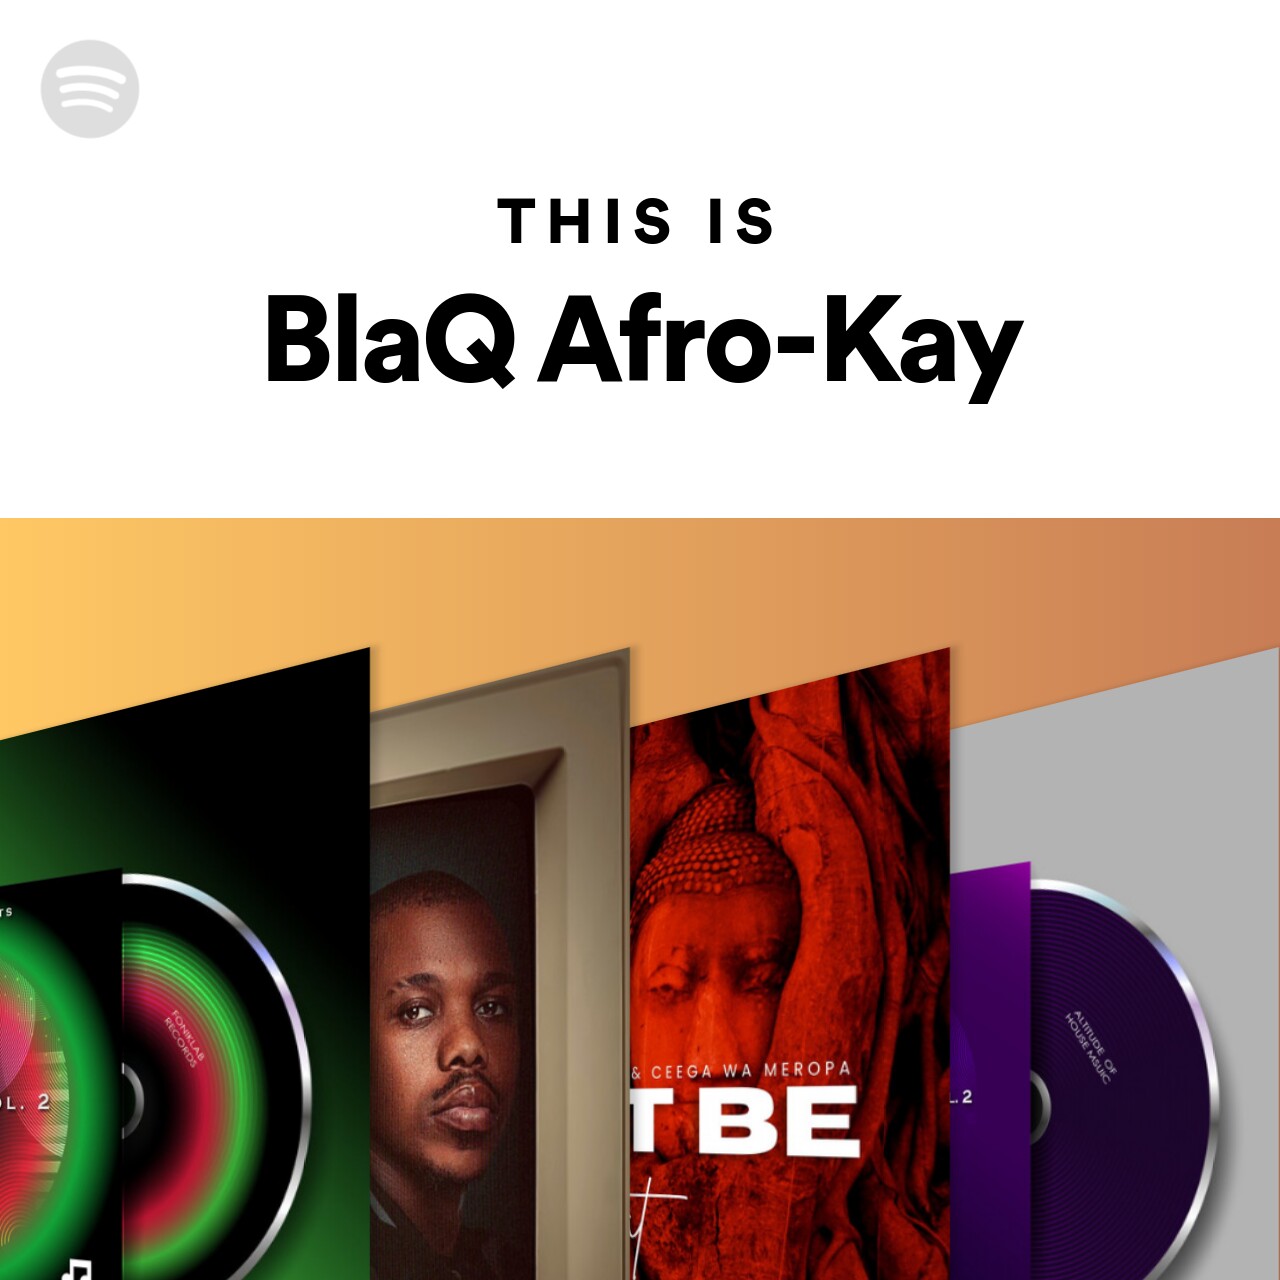 This Is BlaQ Afro-Kay